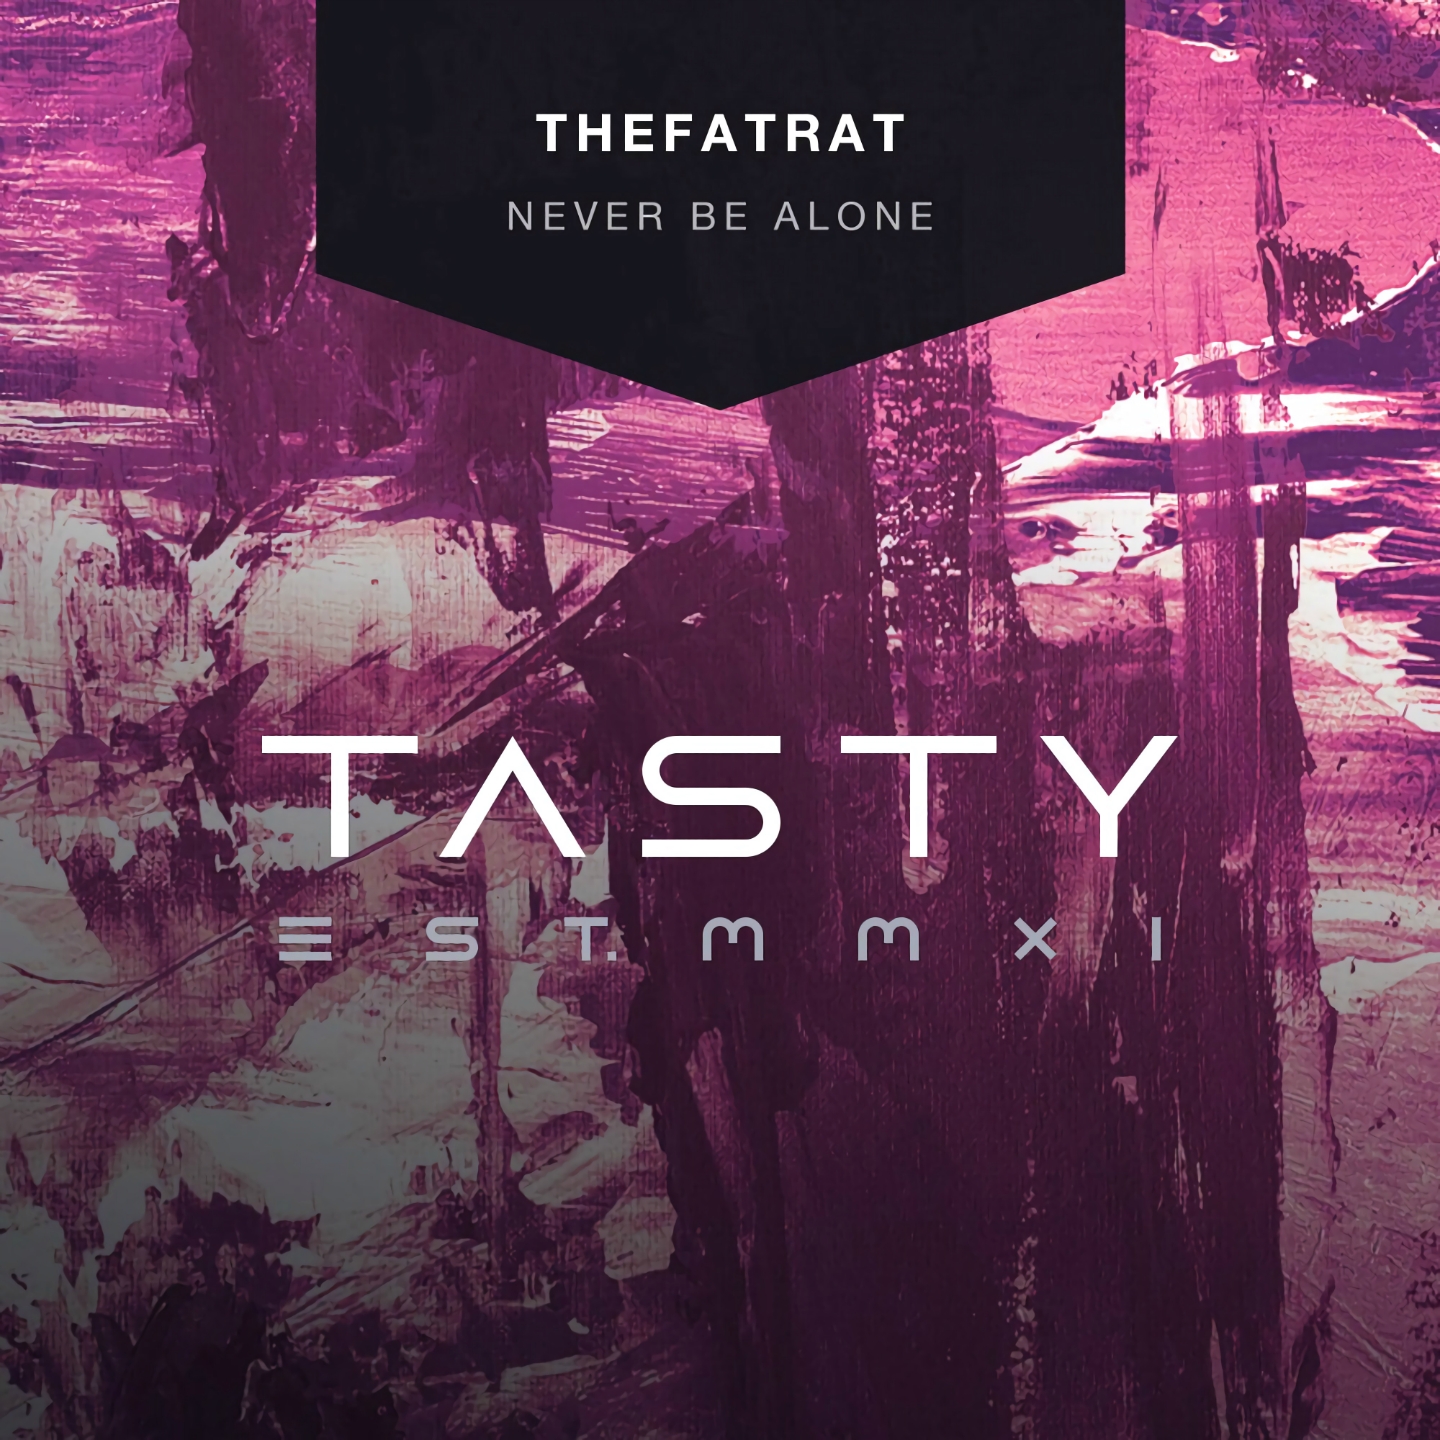 Stay never leave. THEFATRAT never be Alone. THEFATRAT обложки. Never be Alone. THEFATRAT плейлист.